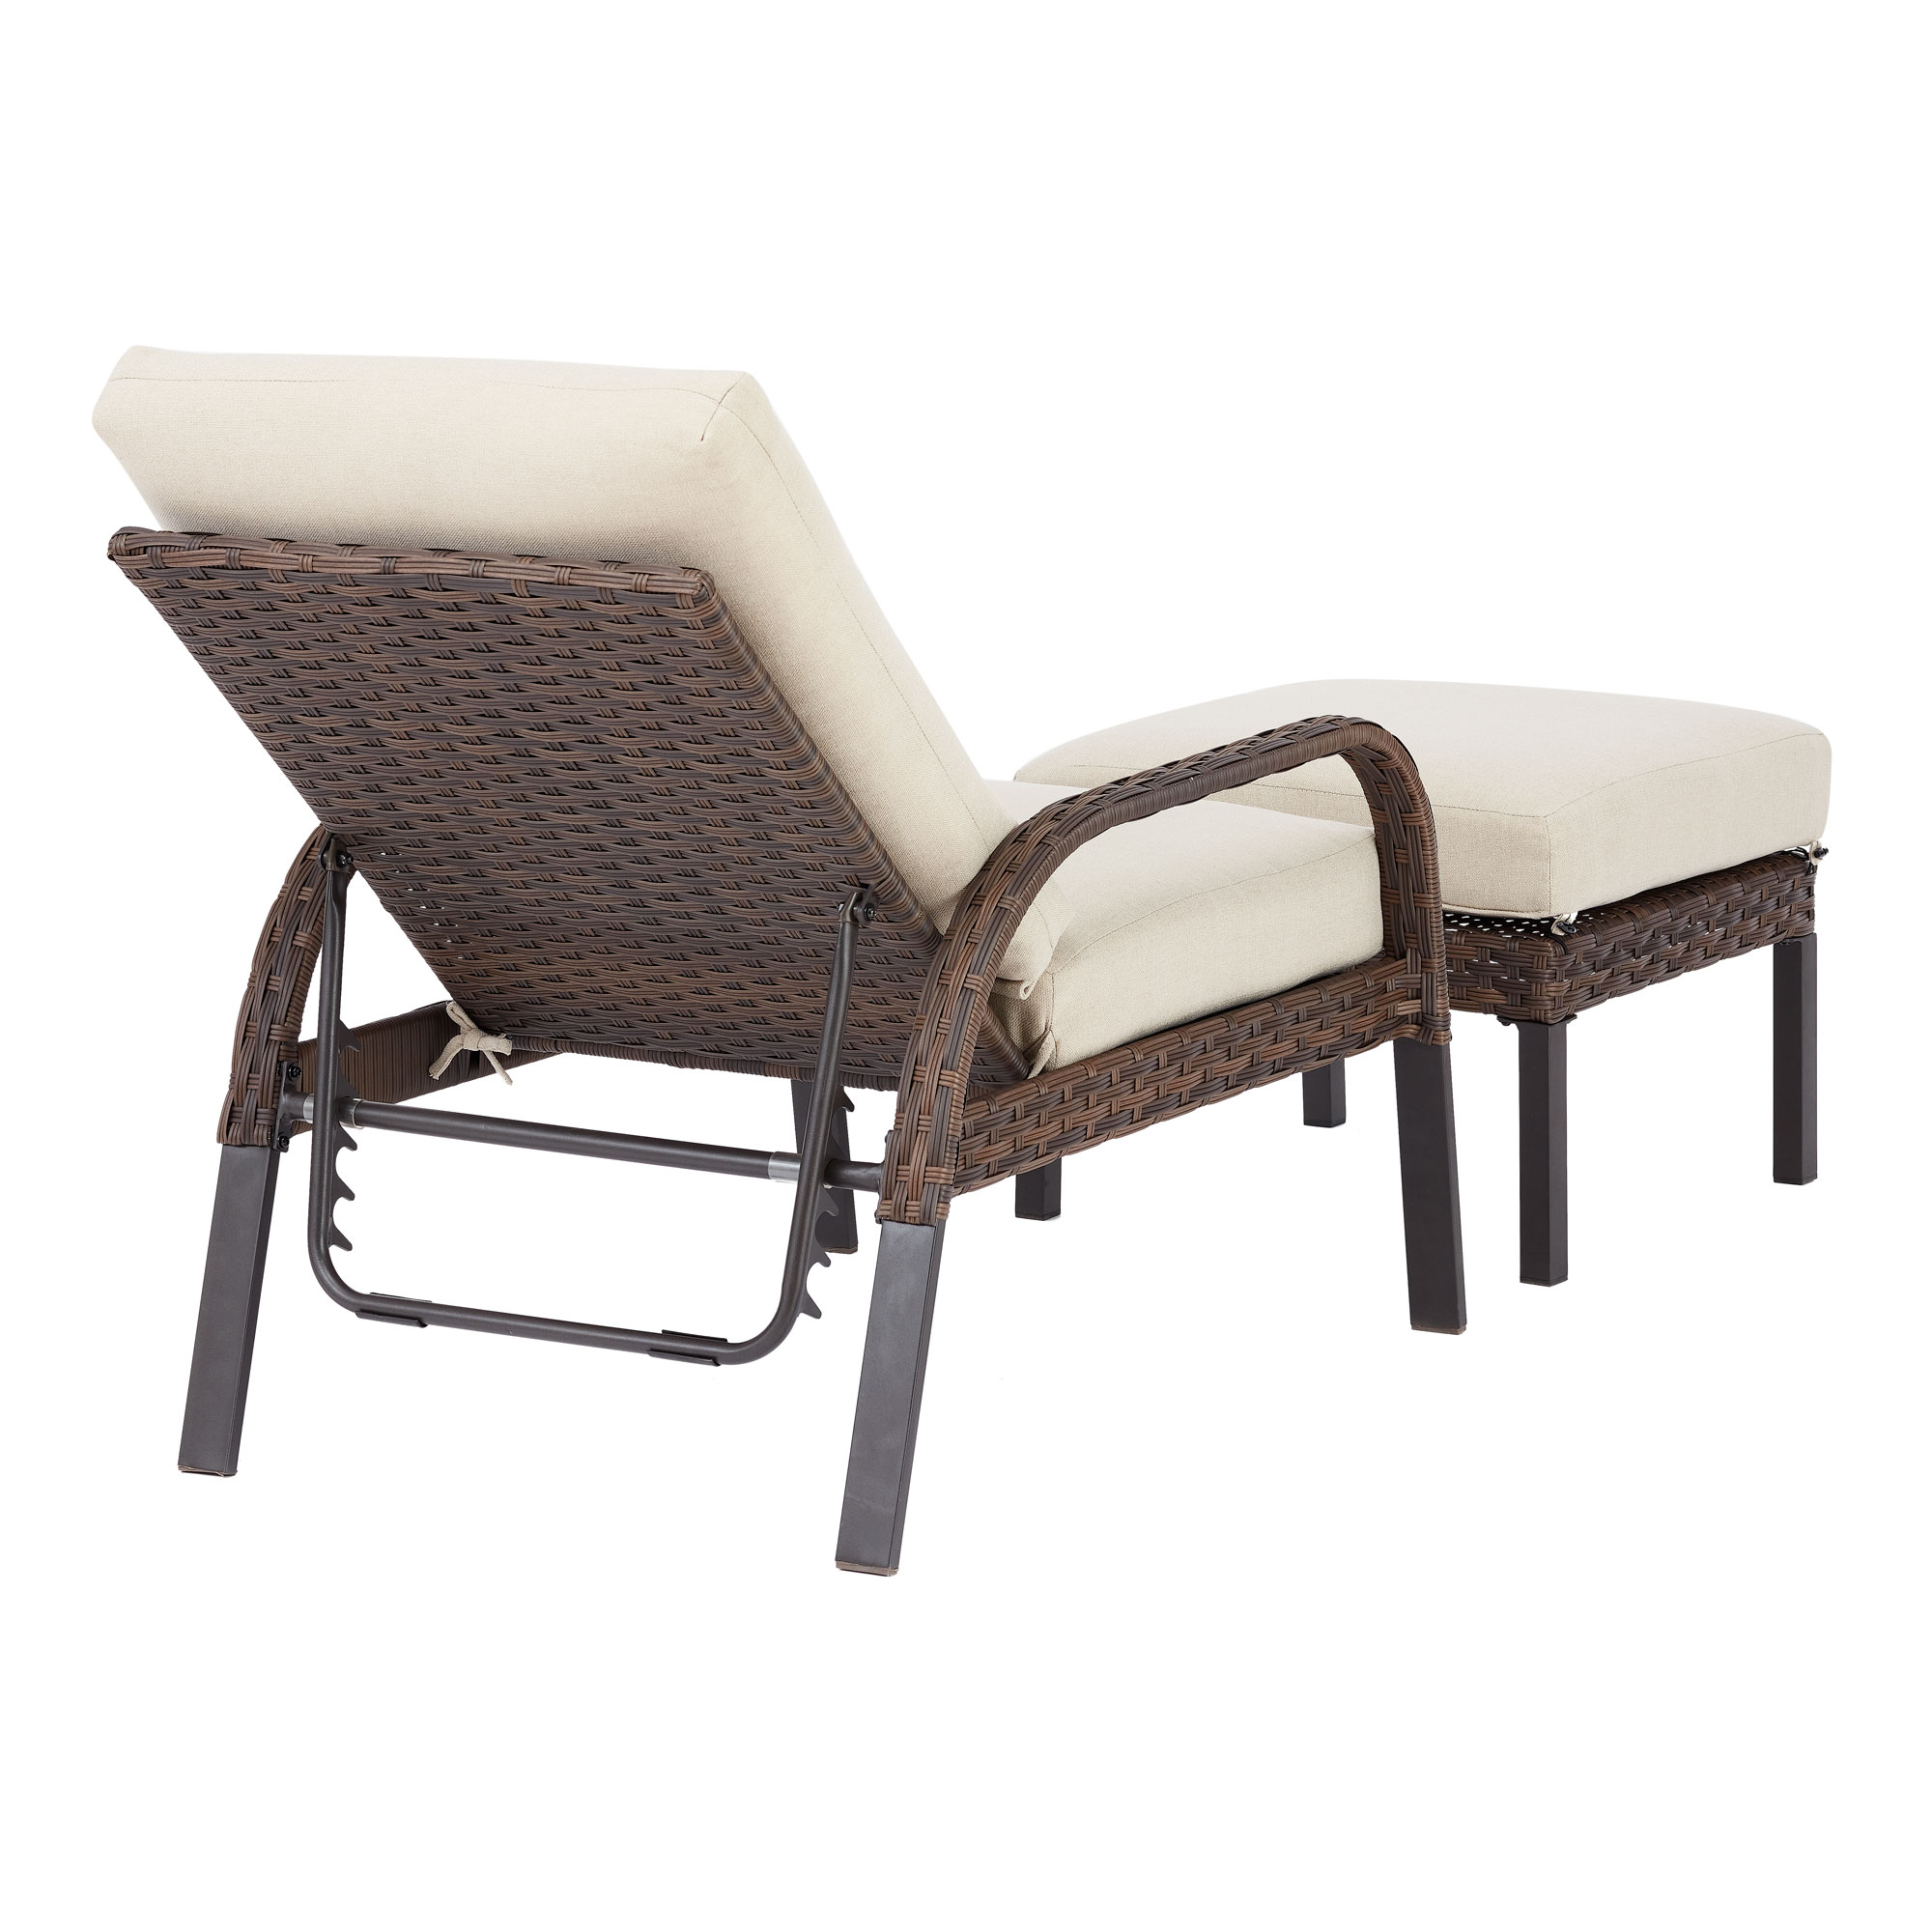 Mainstays Tuscany Ridge Wicker Reclining Chaise Lounge with Ottoman, Beige - image 5 of 8